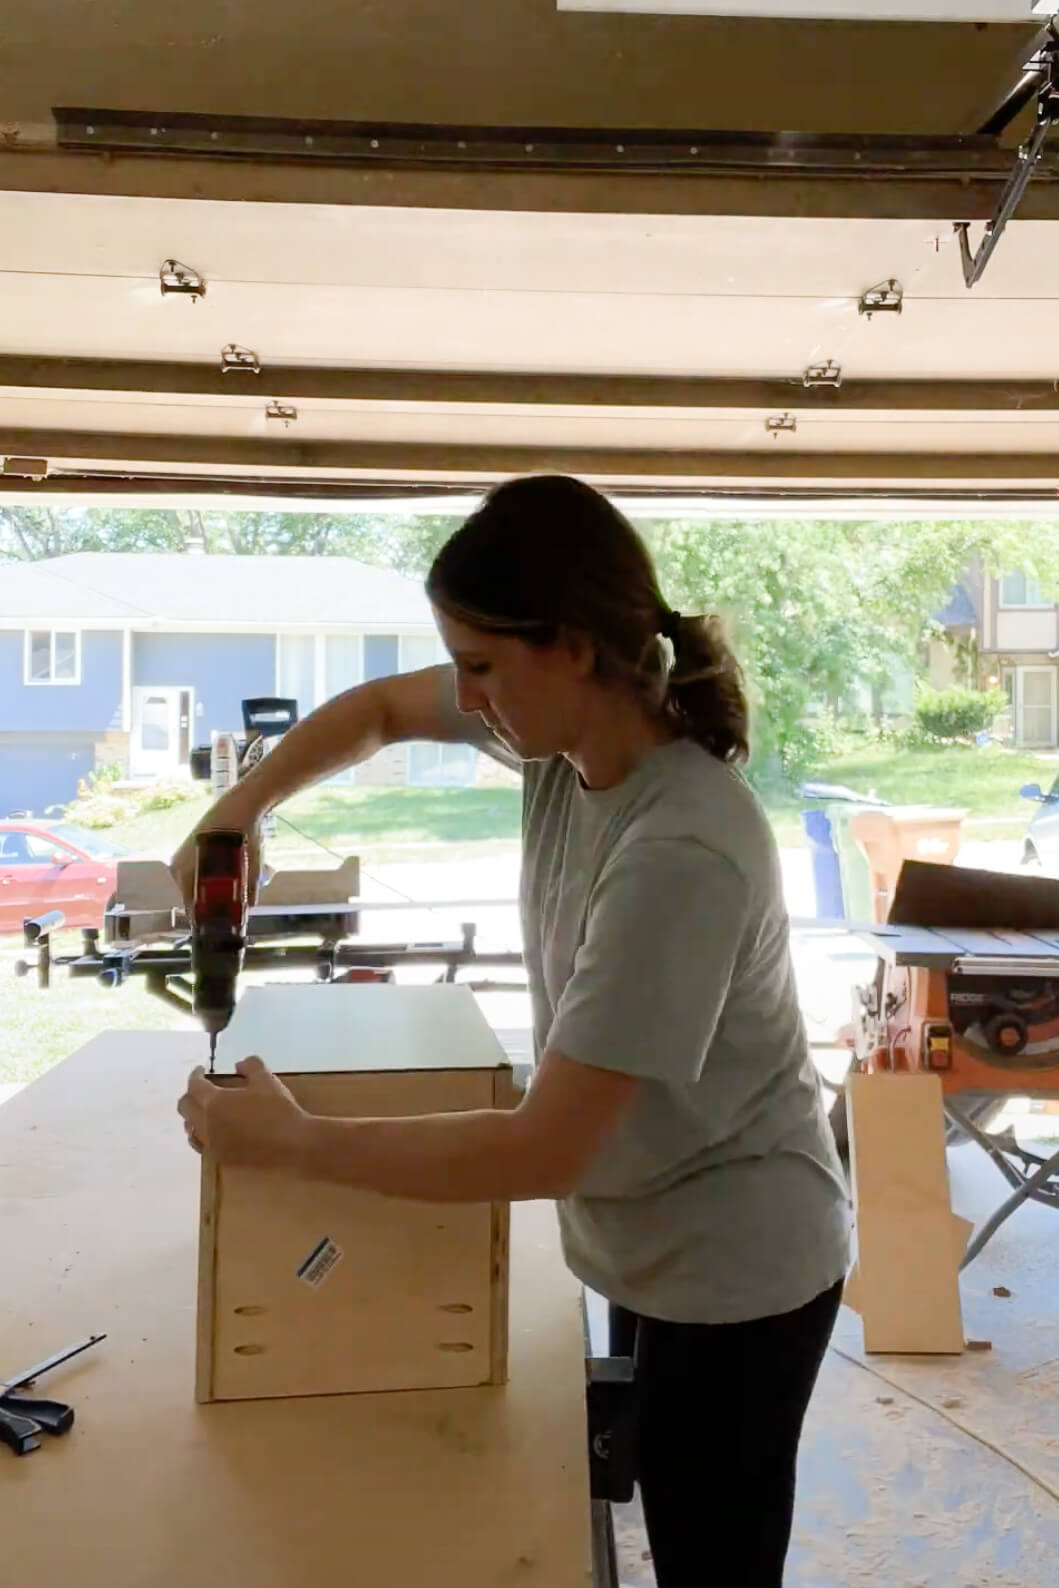 Woman building cabinet box for extending kitchen cabinets to the ceiling.